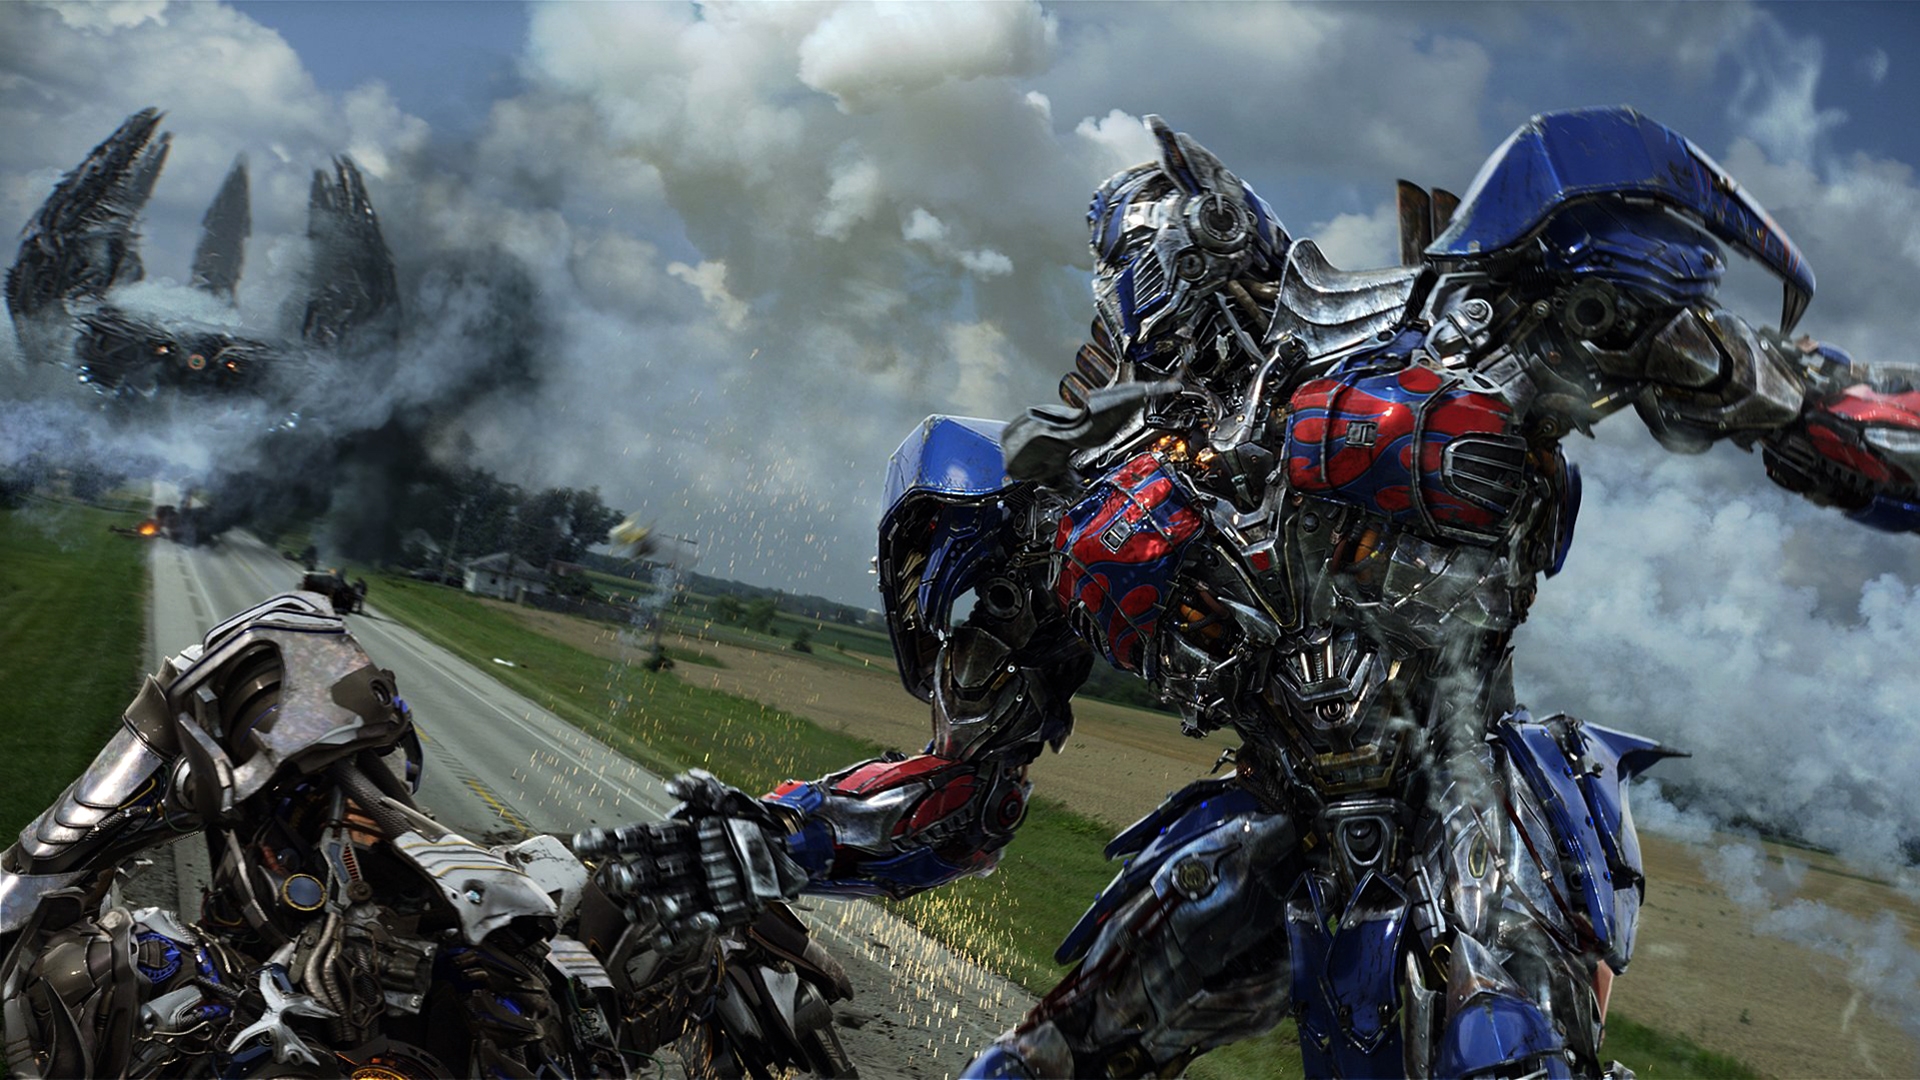 Transformers Wallpapers Page Hd Wallpapers - Transformers 4 Fight - HD Wallpaper 